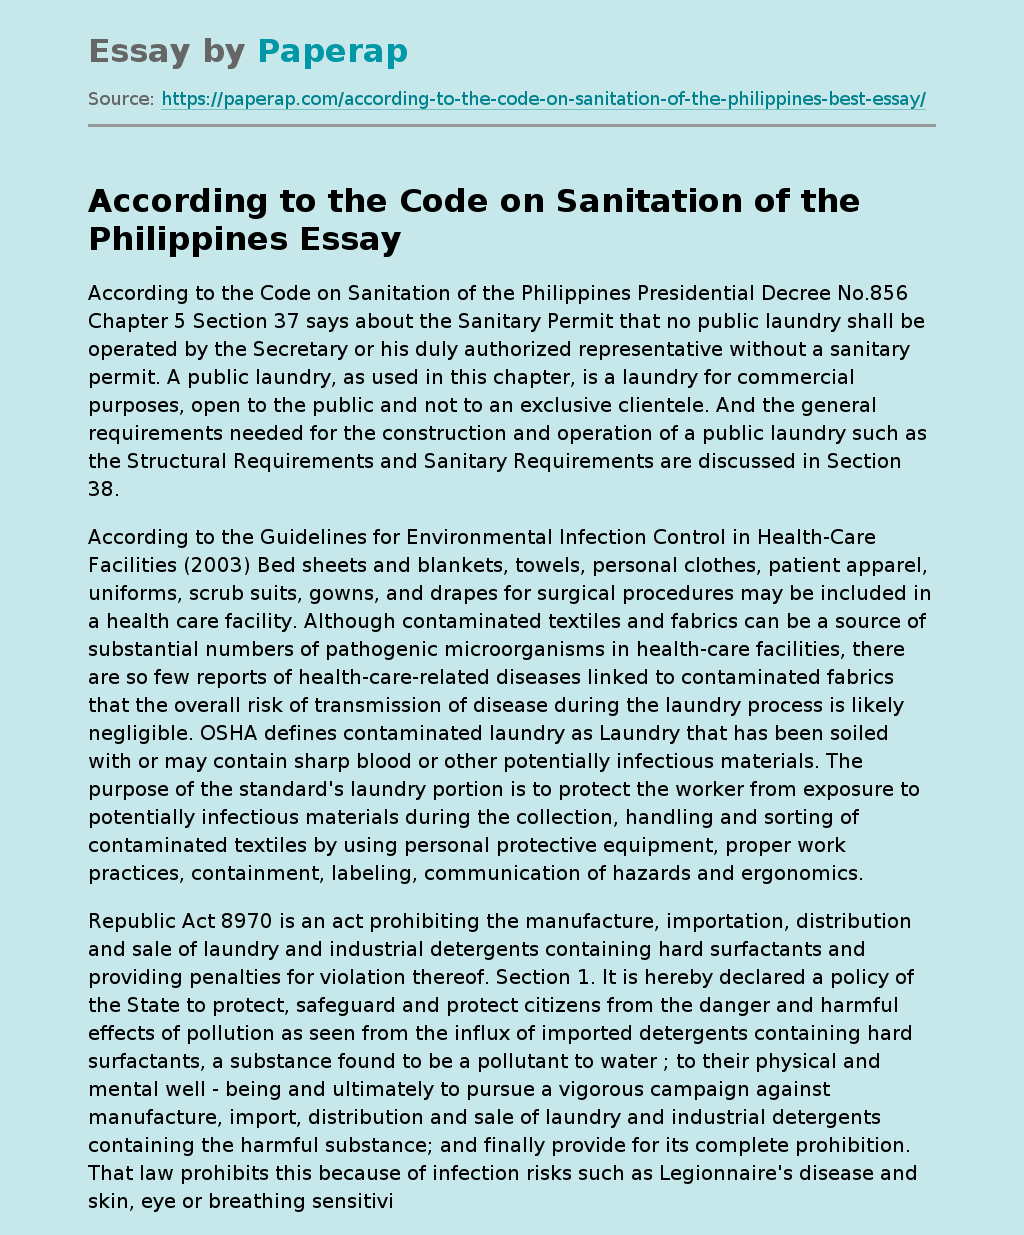 According to the Code on Sanitation of the Philippines